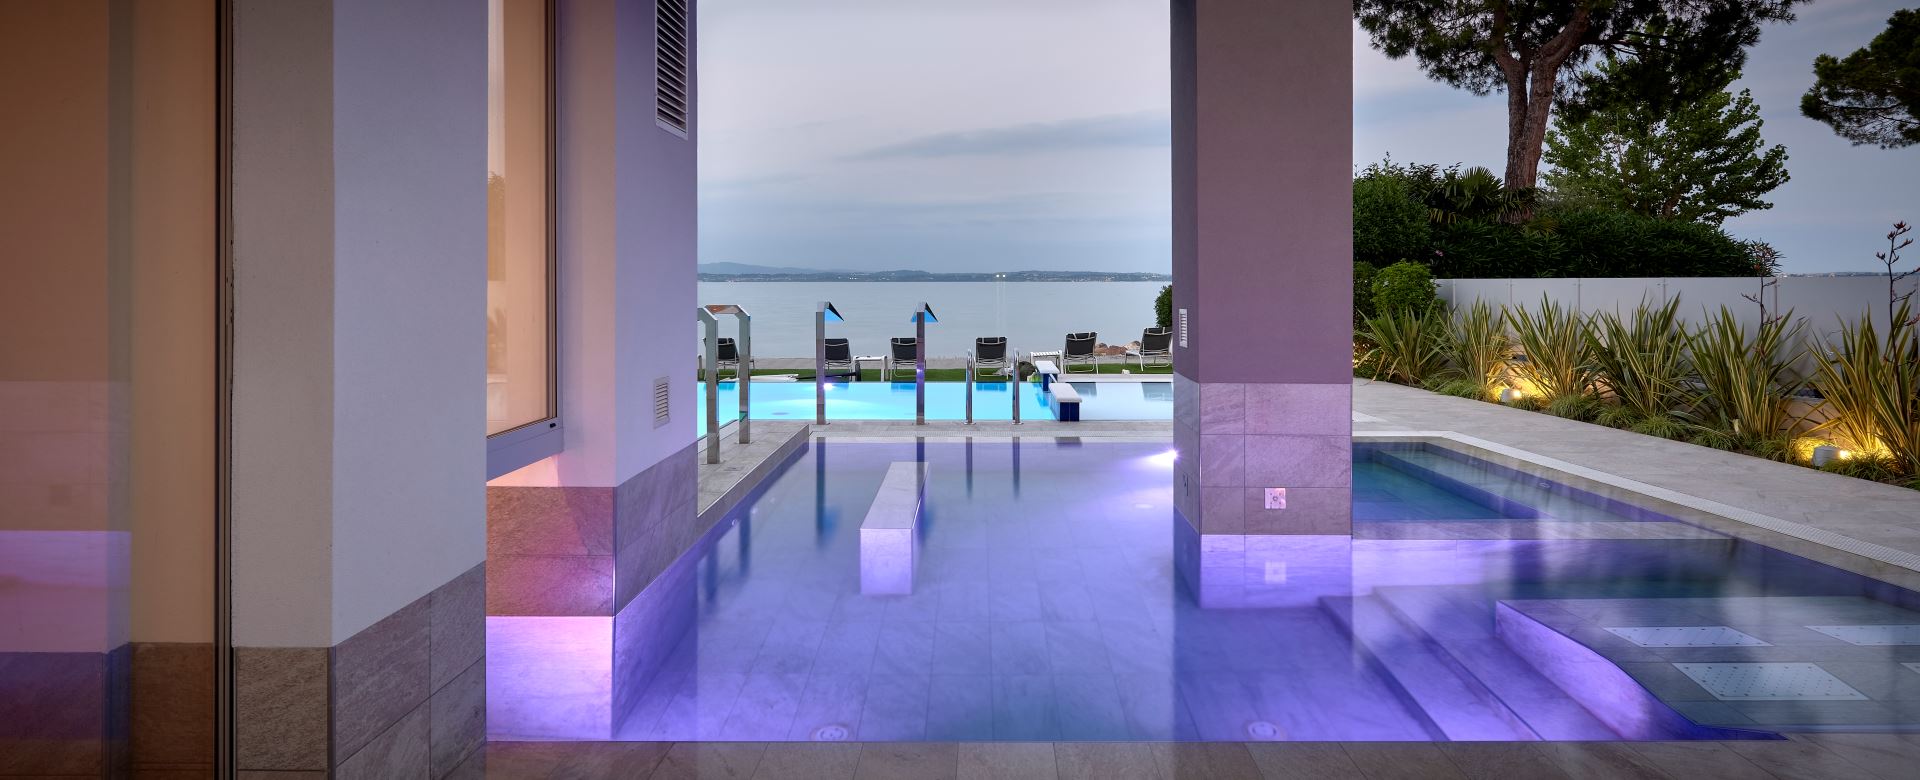 Hotel Spa A Sirmione Con Piscina Termale Ocelle Thermae Spa